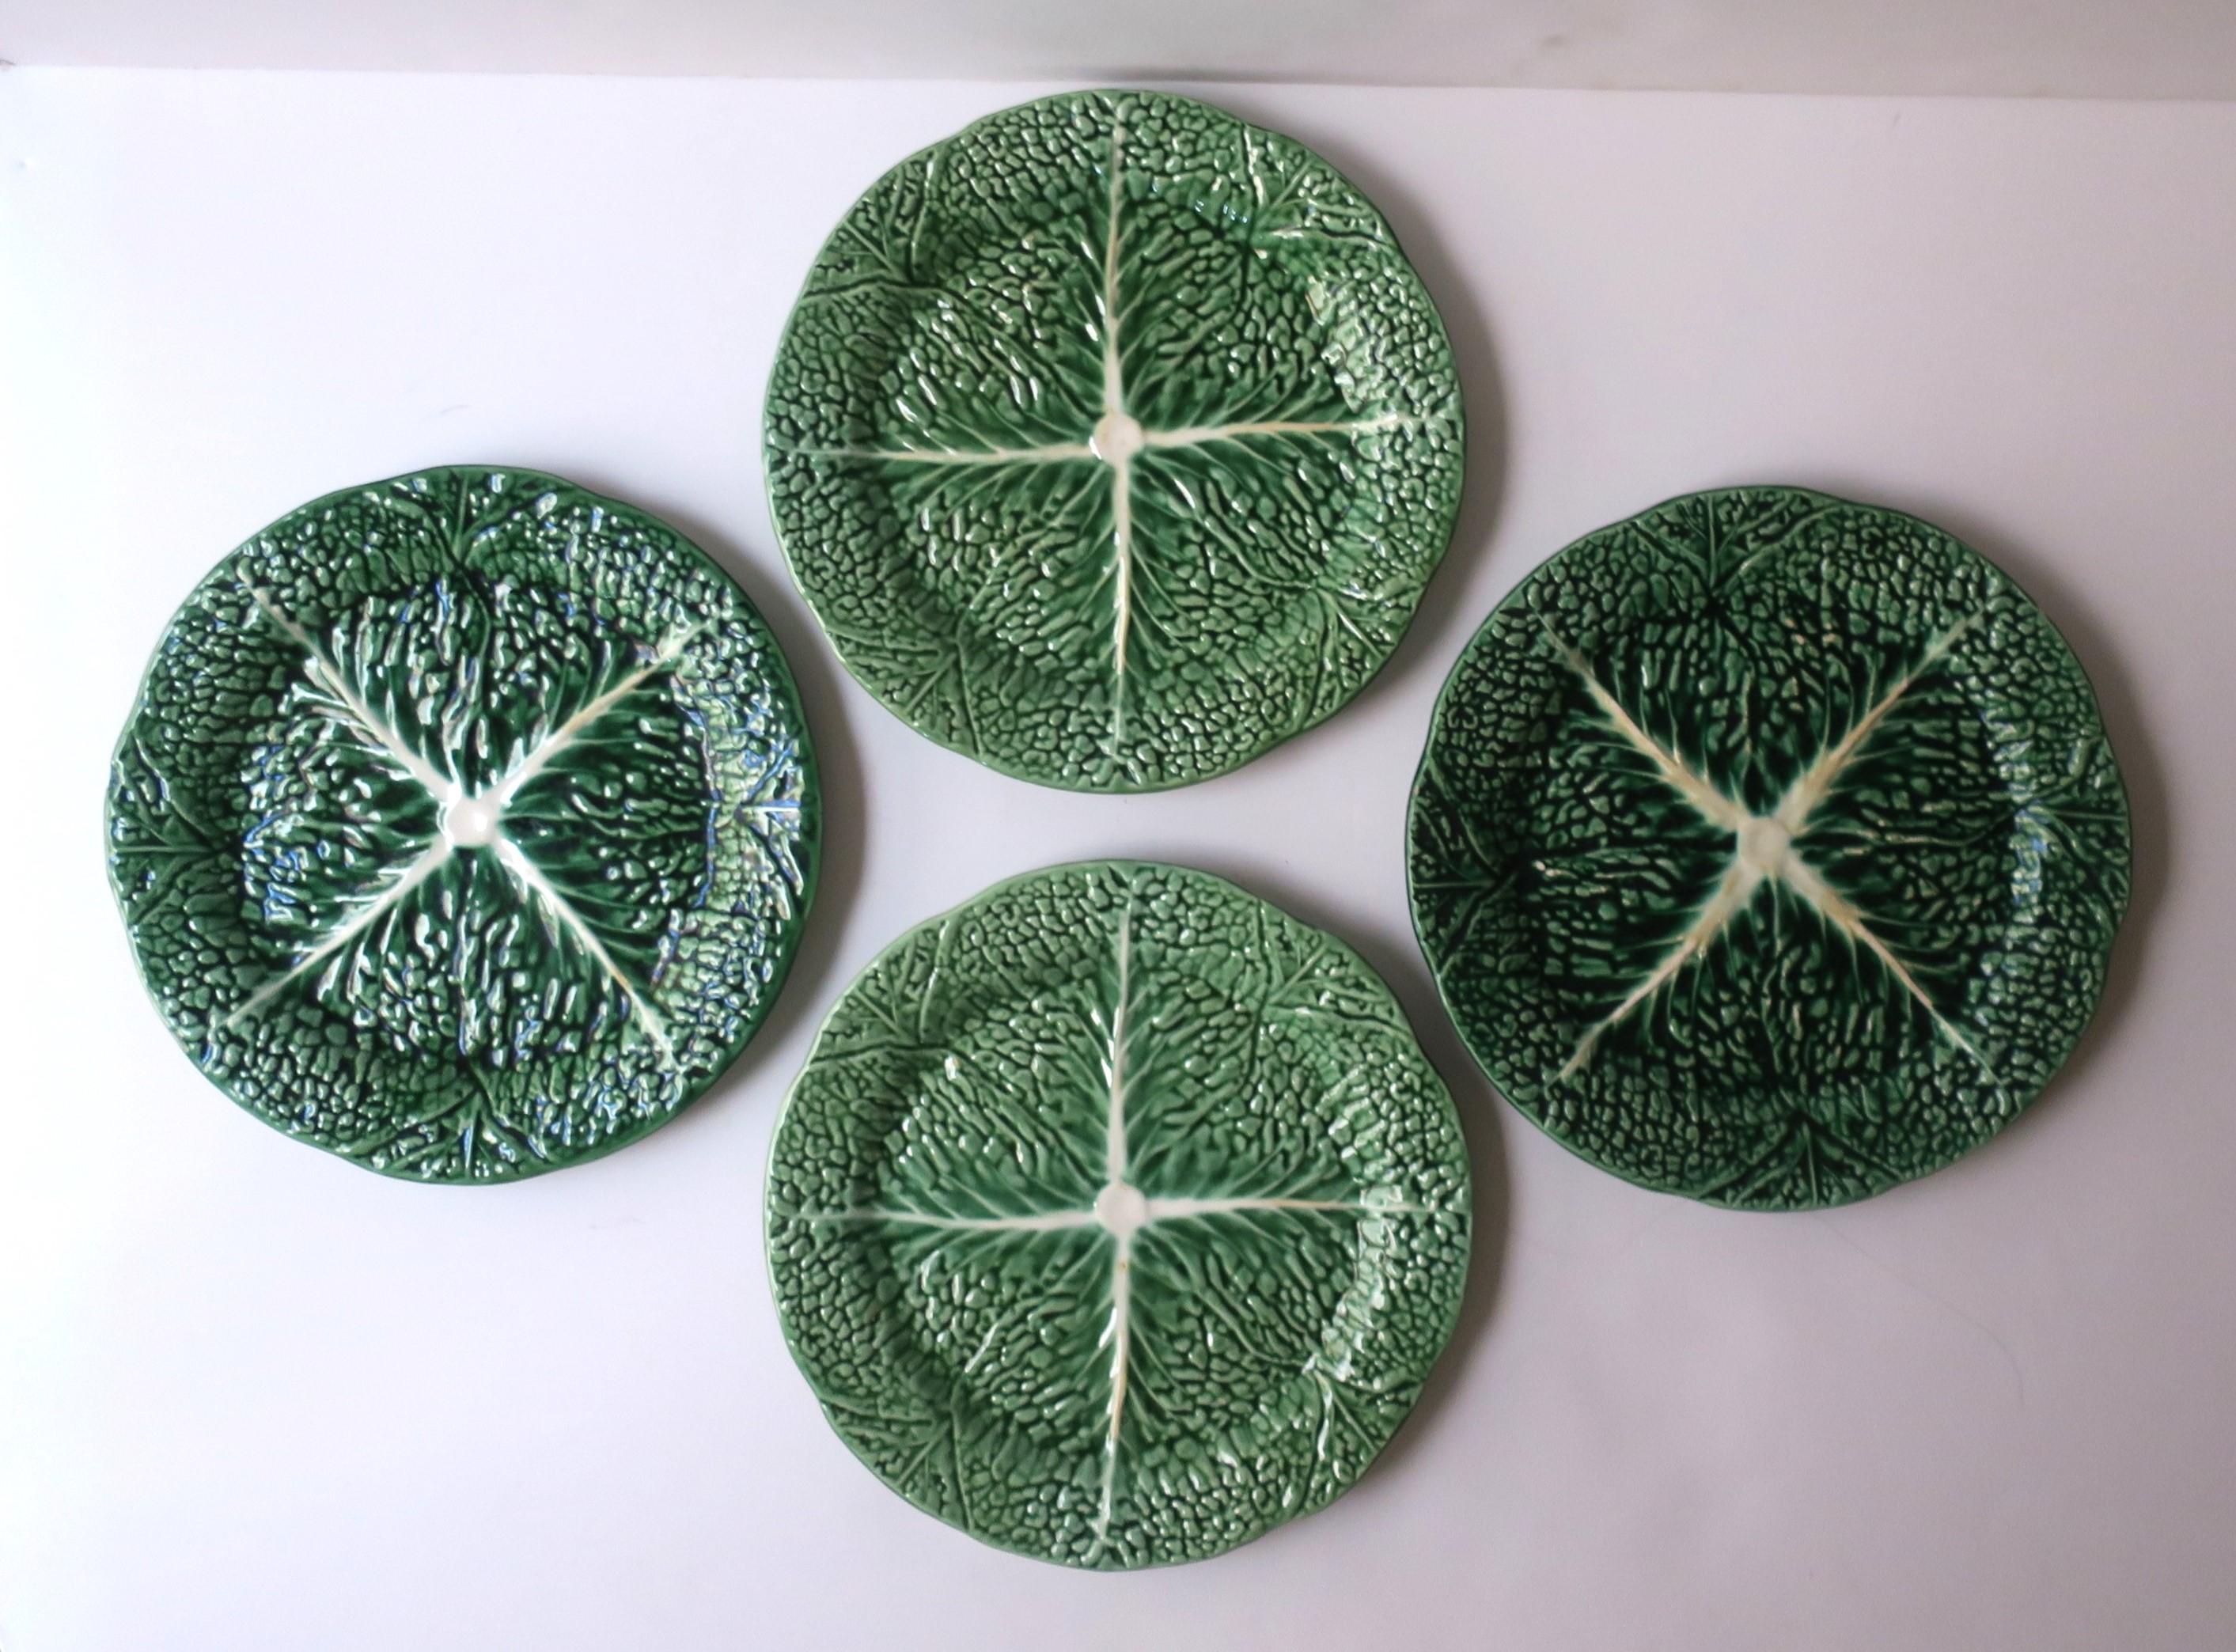 A vintage set of four (4) green and white lettuce or cabbage green leaf plates, Palm Beach style, circa late-20th century, Portugal. A great set for breakfast, lunch, dinner, and more. Set would make a beautiful addition to any dining table, table